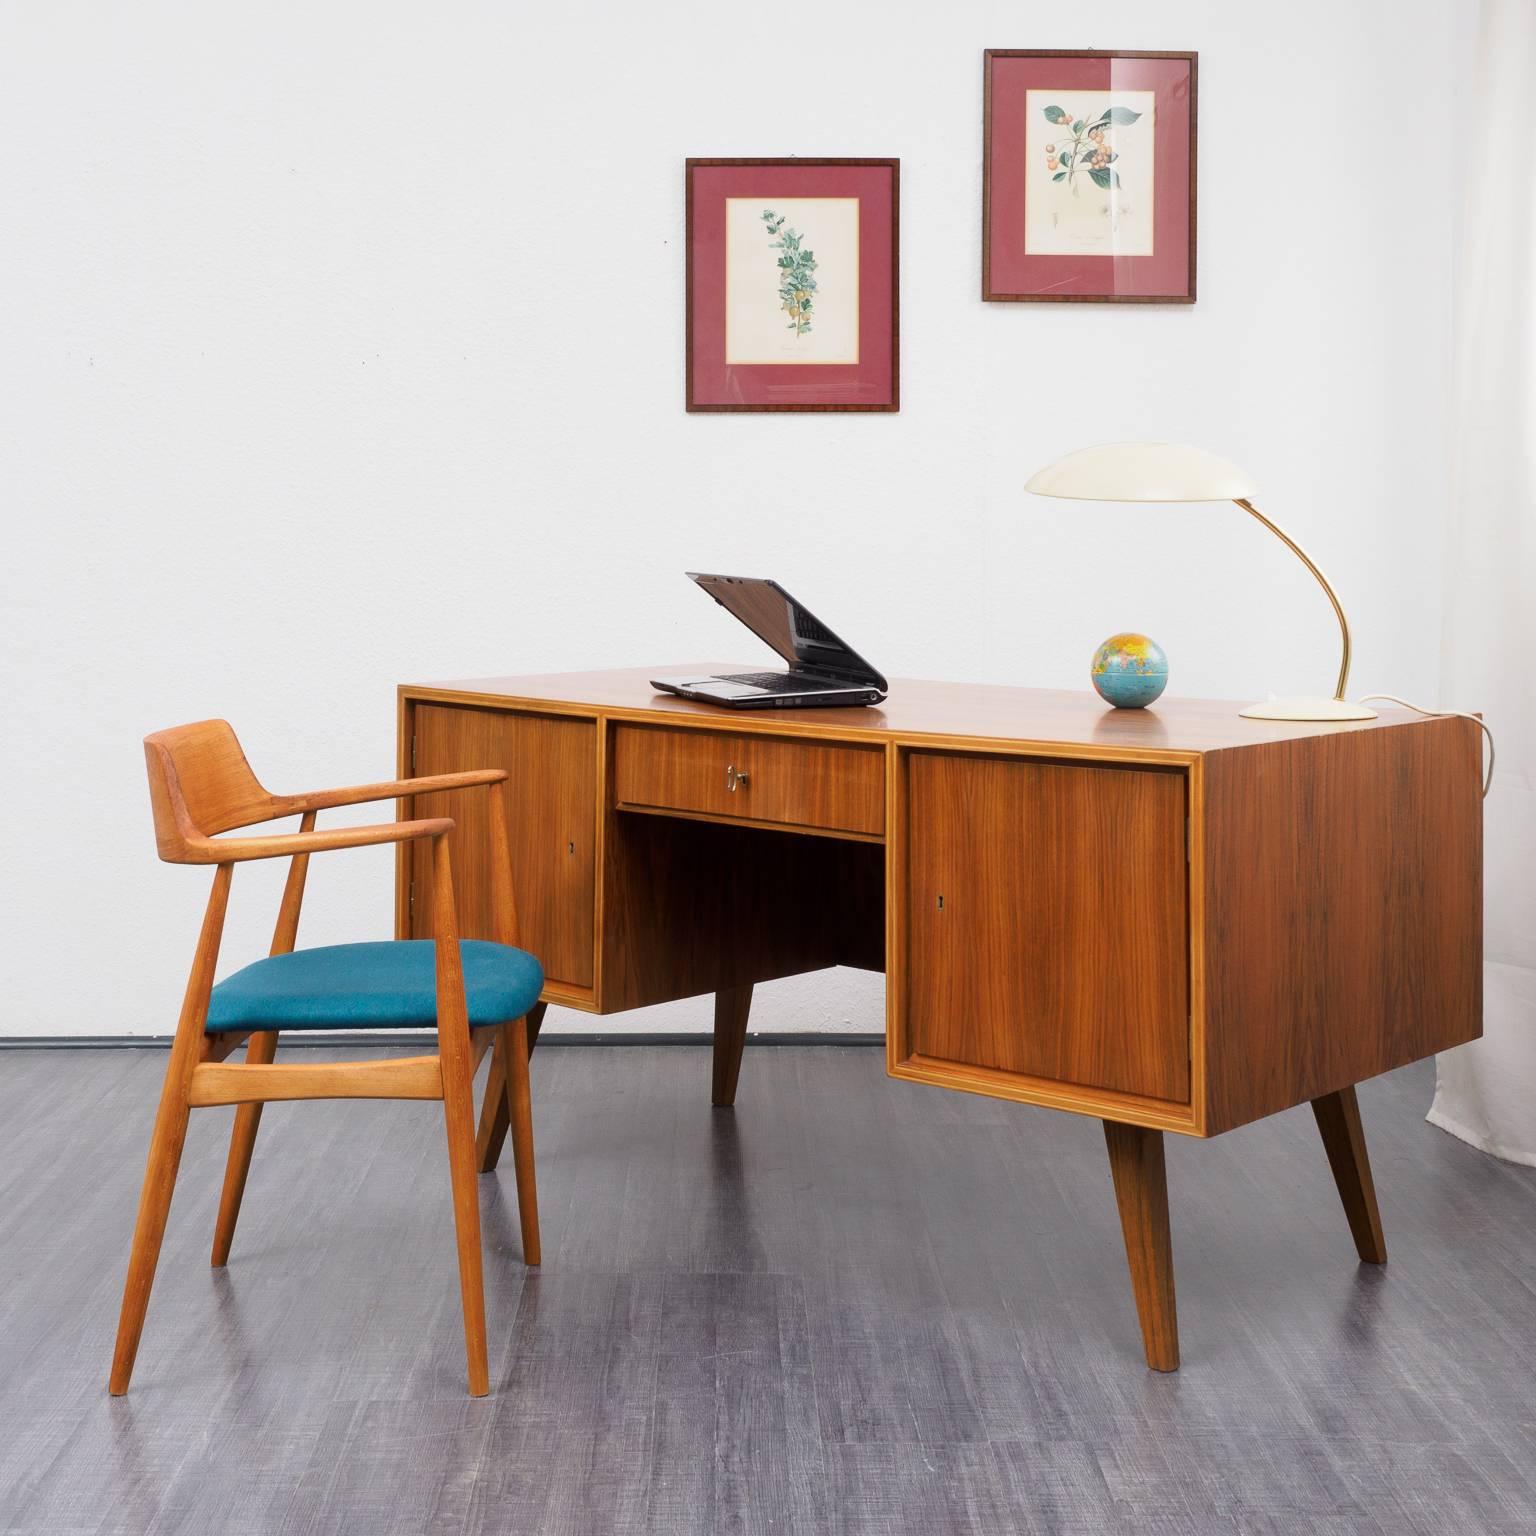 Big walnut desk from the 1960s, classic design. The desk has walnut veneer all around and comes with one lockable drawer, two lockable doors and three solid wood drawers inside. Practical book shelf at the back.

Good condition with small traces of